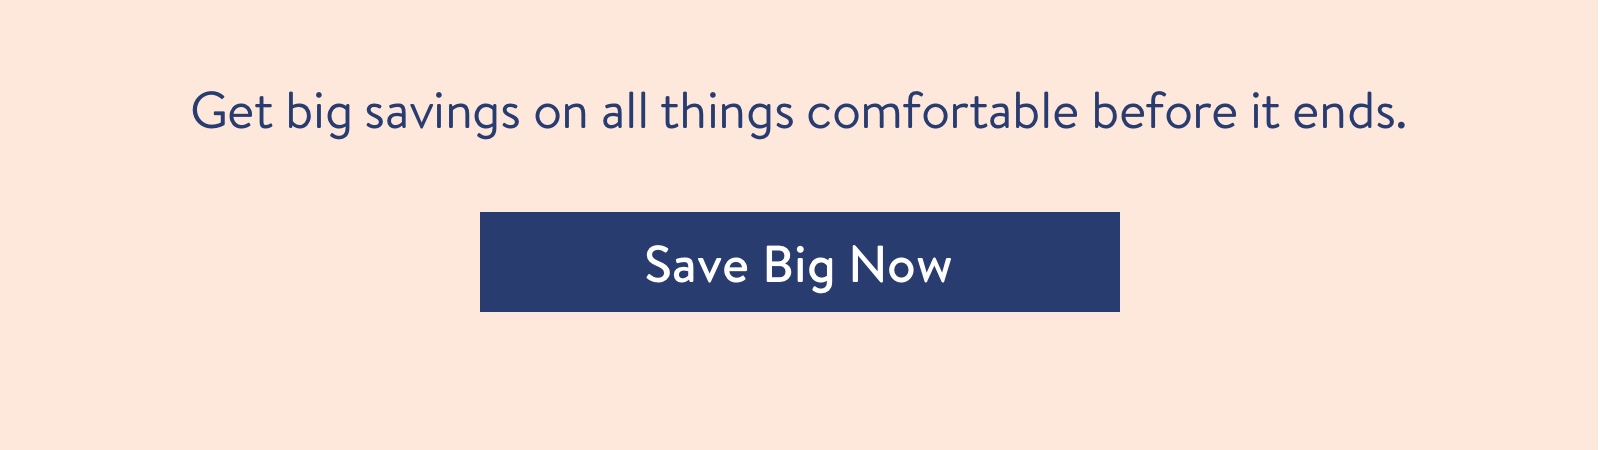 Get big savings on all things comfortable before it ends